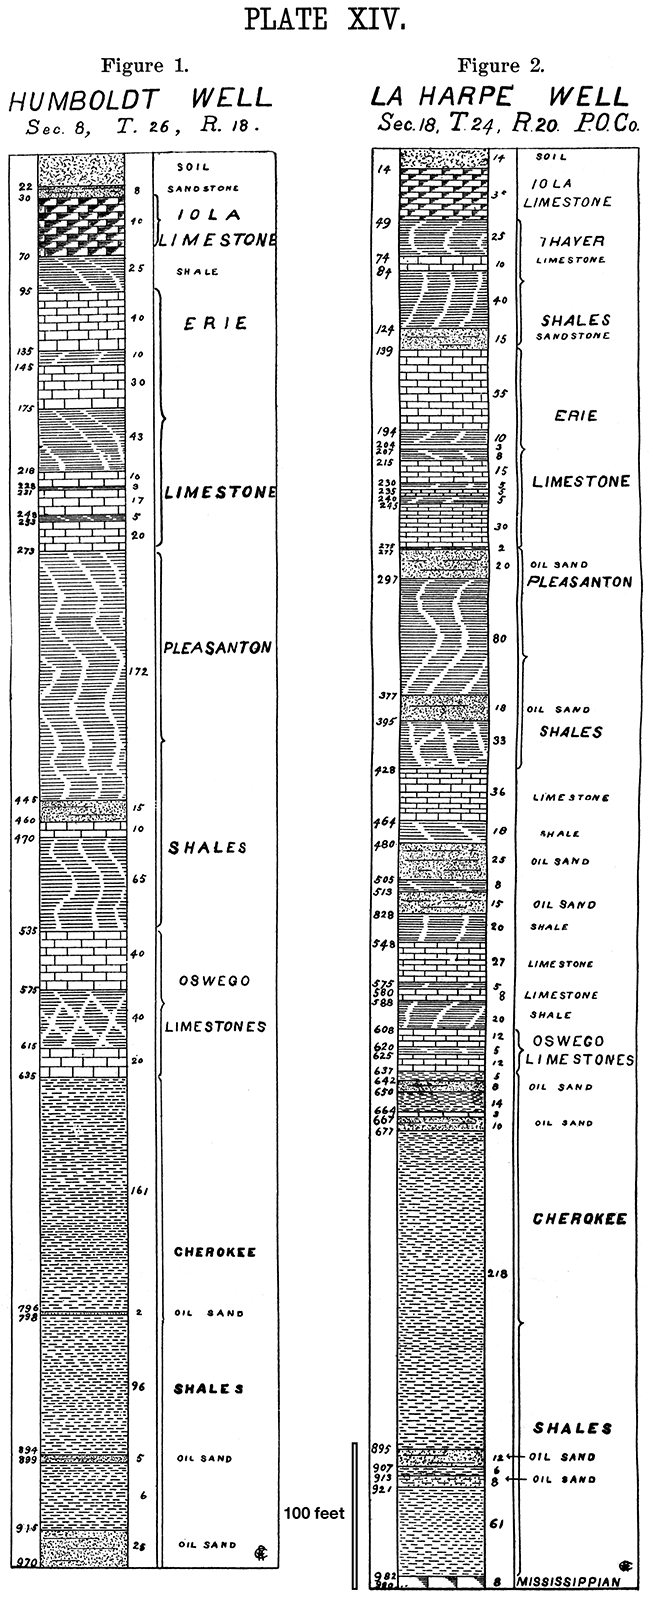 Two stratigraphic columns from the Humboldt and La Harpe wells.